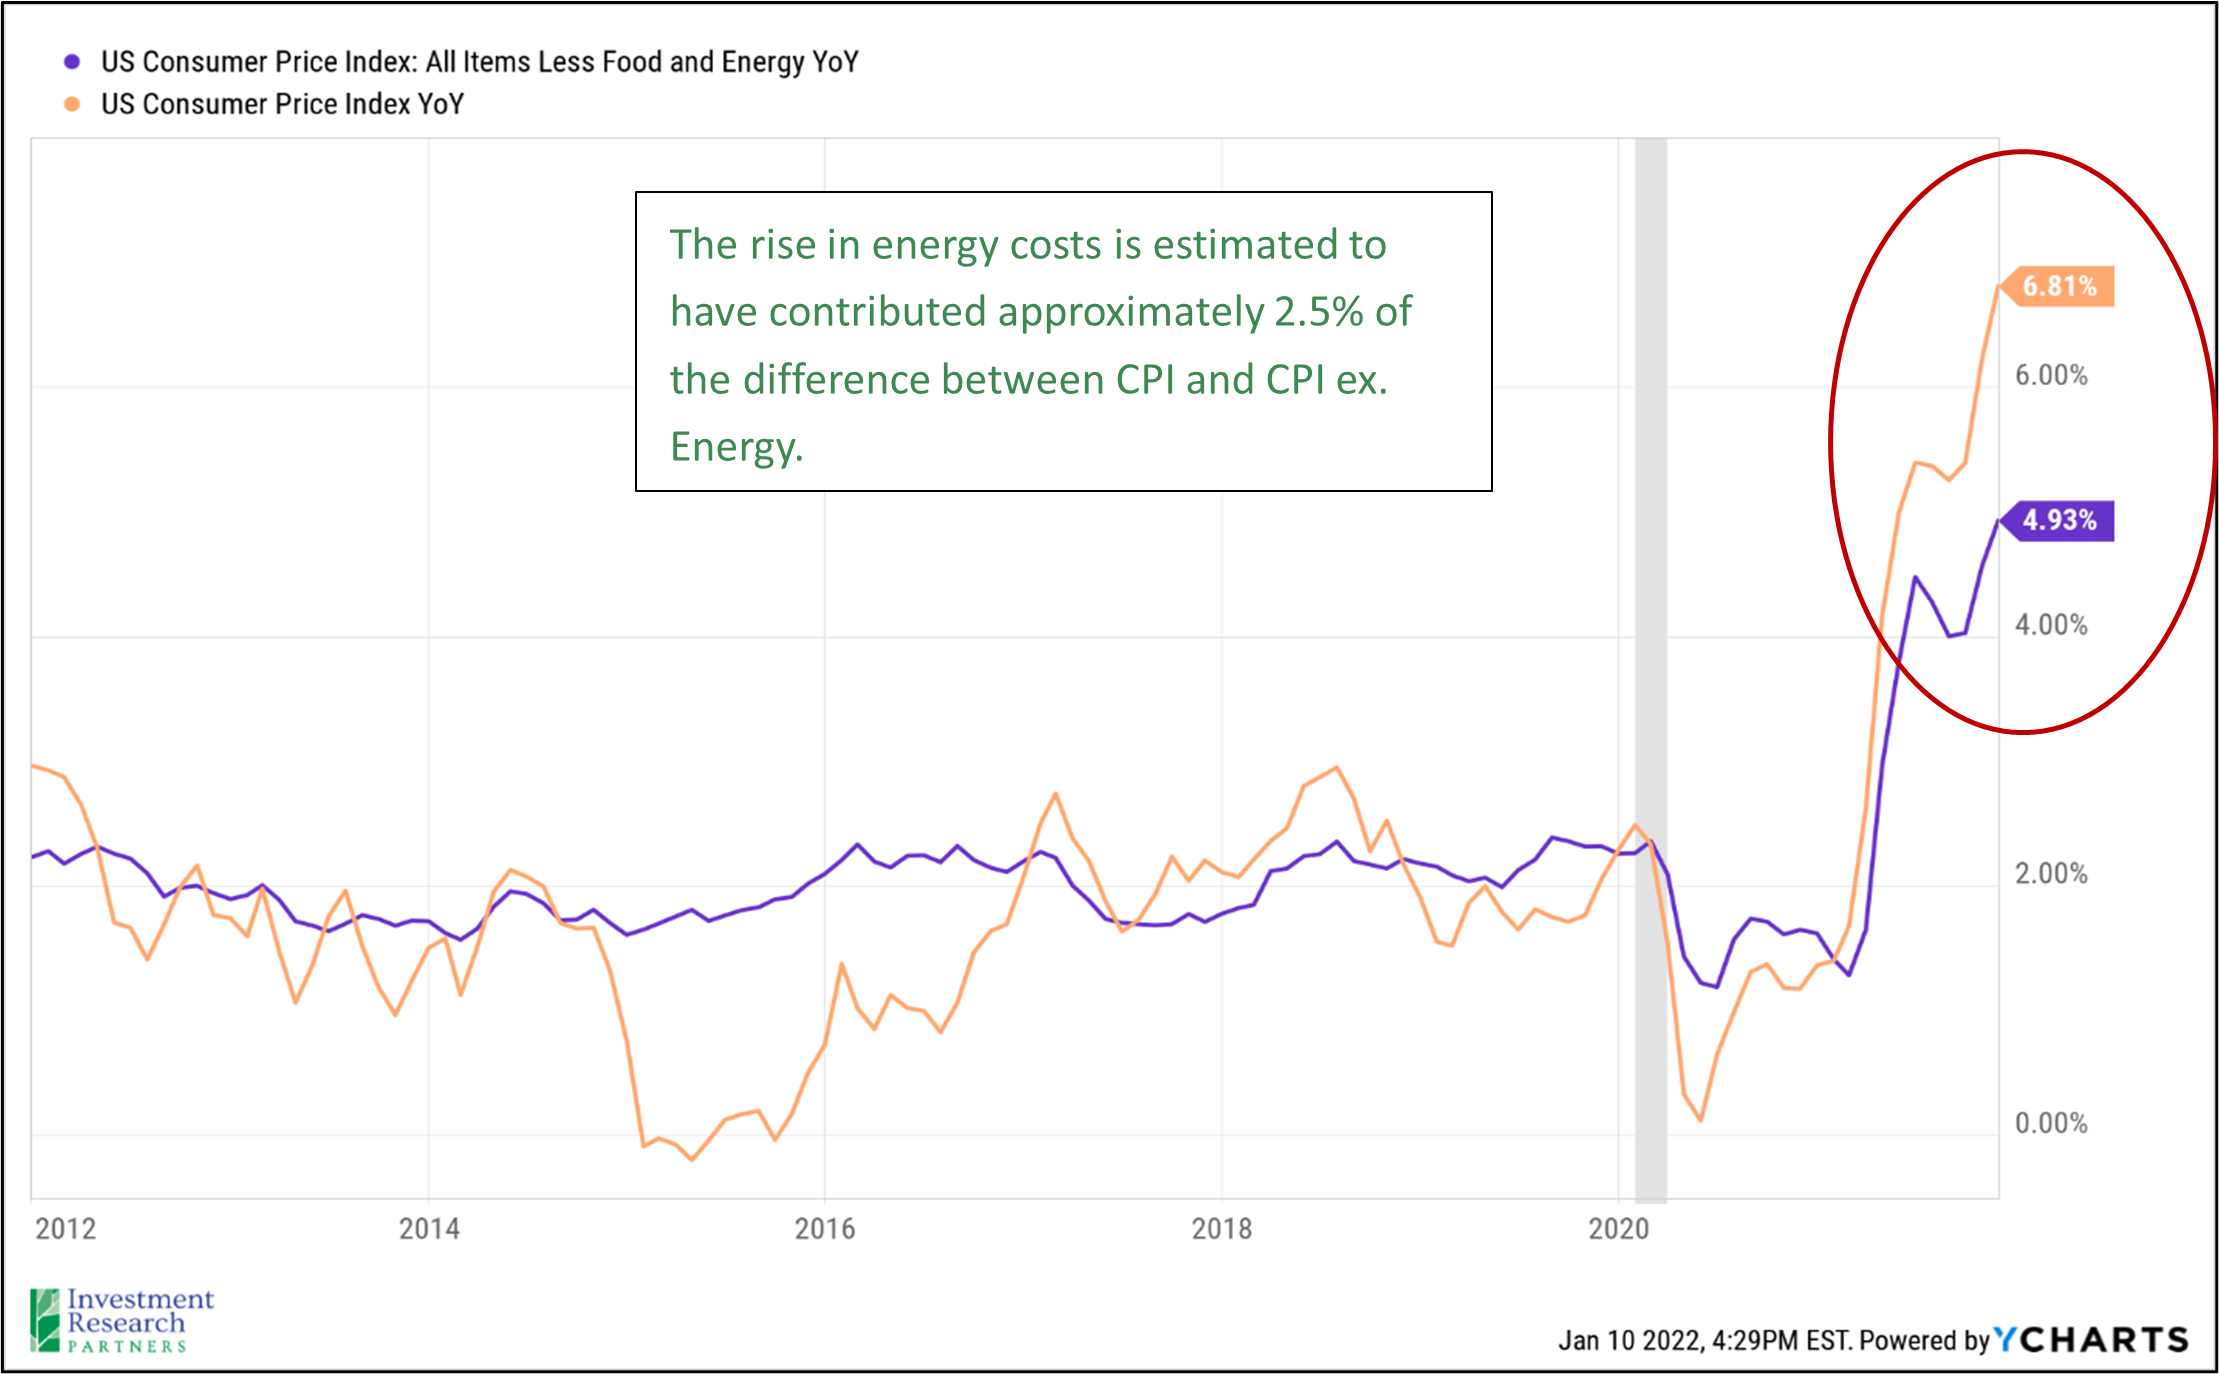 Line graph depicting US Consumer Price Index: All Items Less Food and Energy YoY in purple and US Consumer Price Index YoY in orange since 2012, with text reading: The rise in energy costs is estimated to have contributed approximately 2.5% of the difference between CPI and CPI ex. Energy.